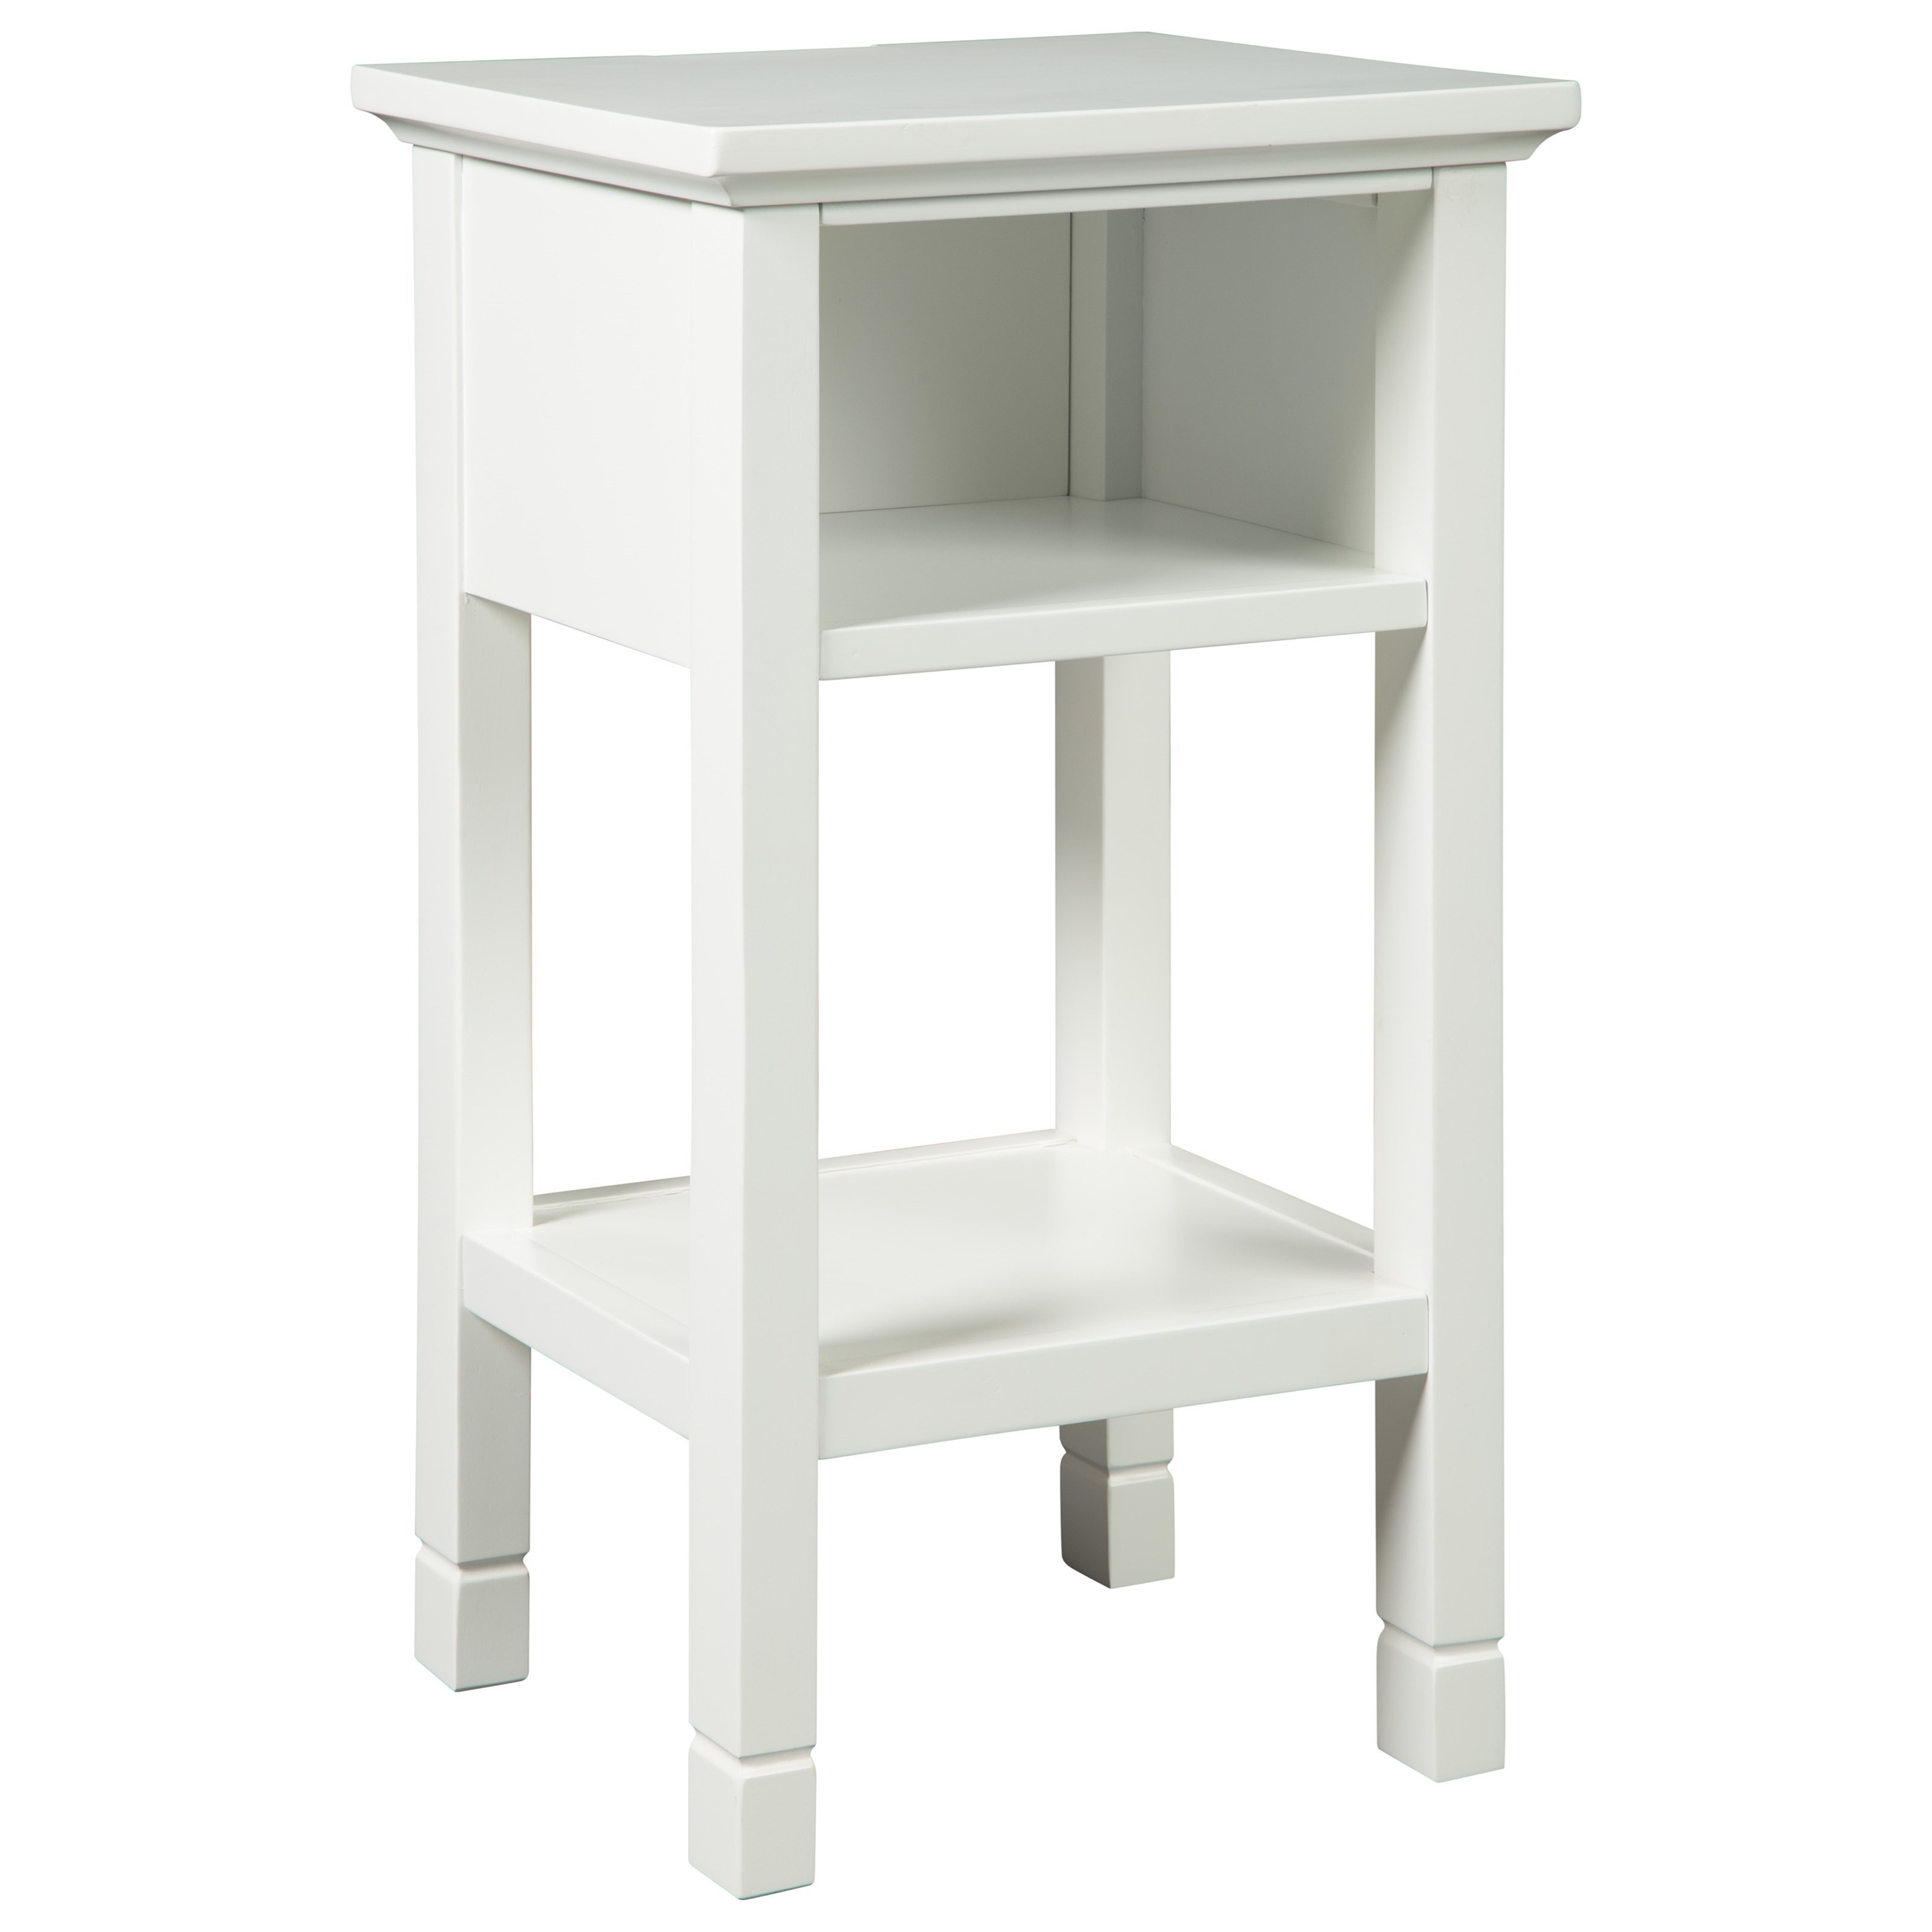 contemporary accent table with cubby shelf signature design products ashley color marnville tables round mirrored nightstand two tier antique beach style living room ornate side